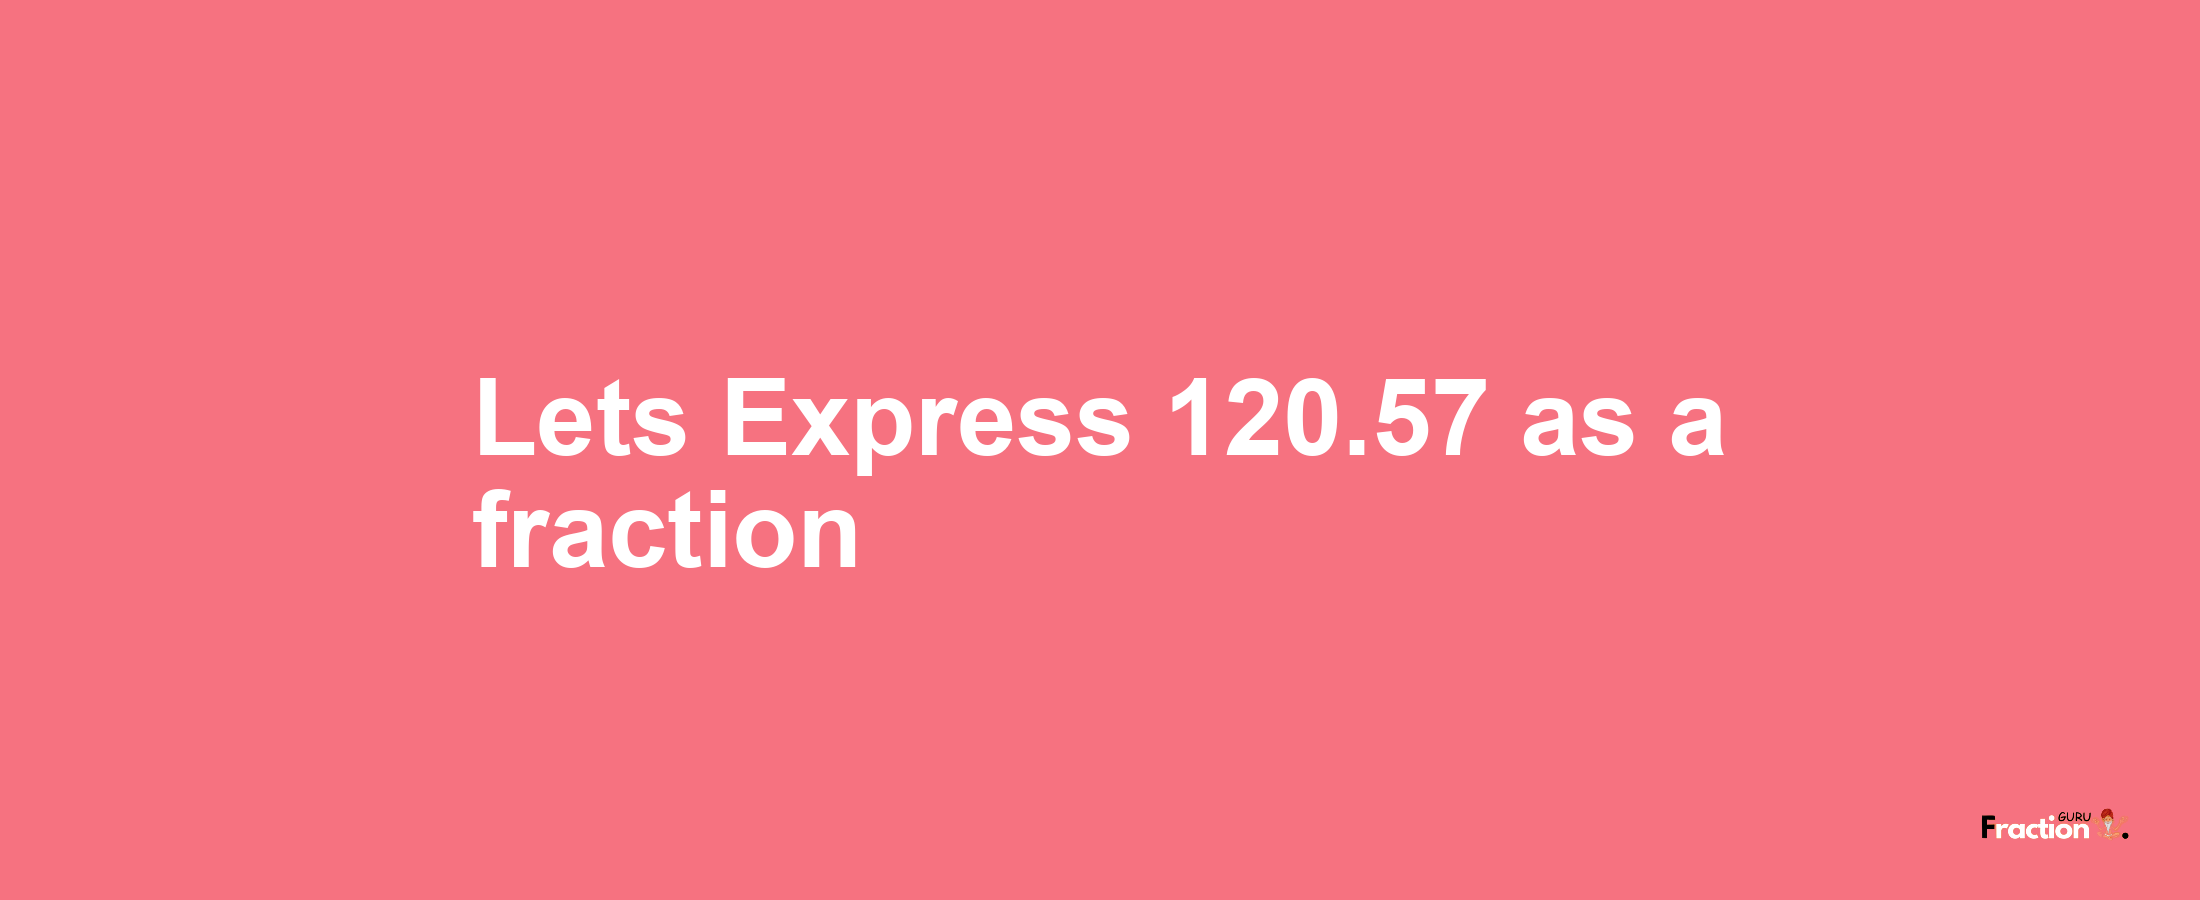 Lets Express 120.57 as afraction